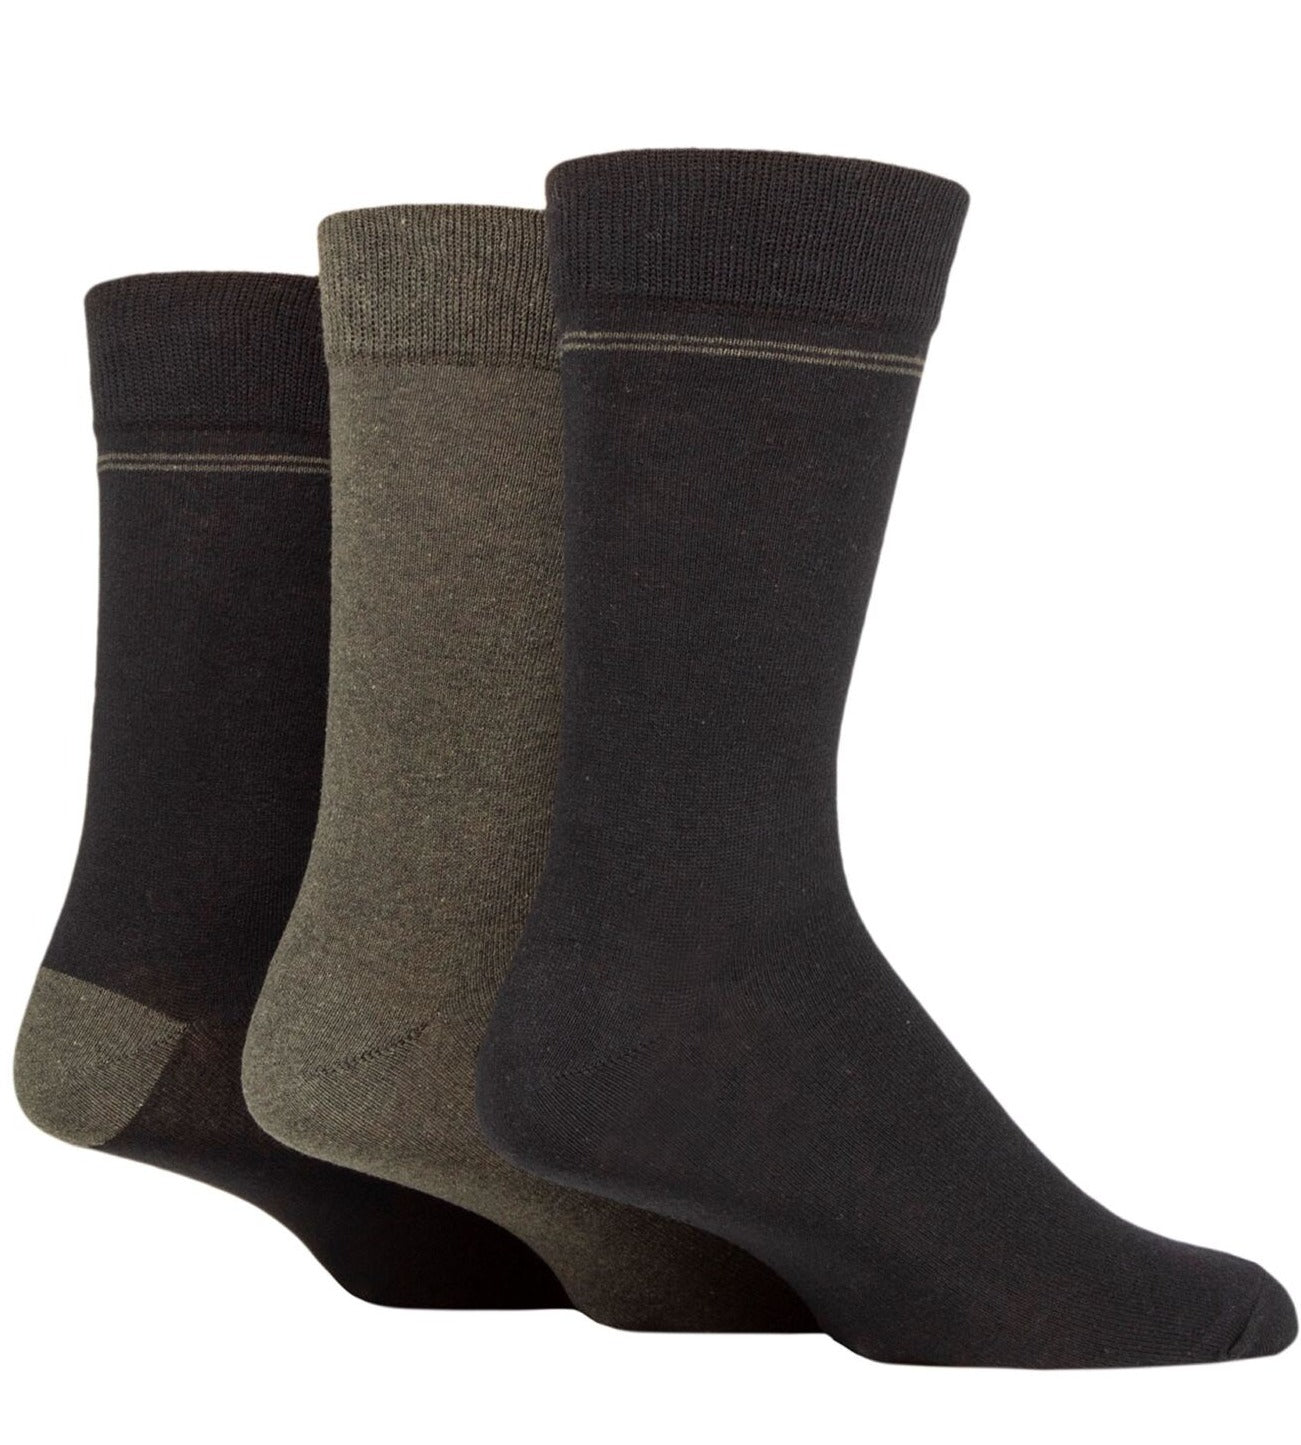 TORE 3Pk 100% Recycled Fine Placement Stripe Socks - Men's